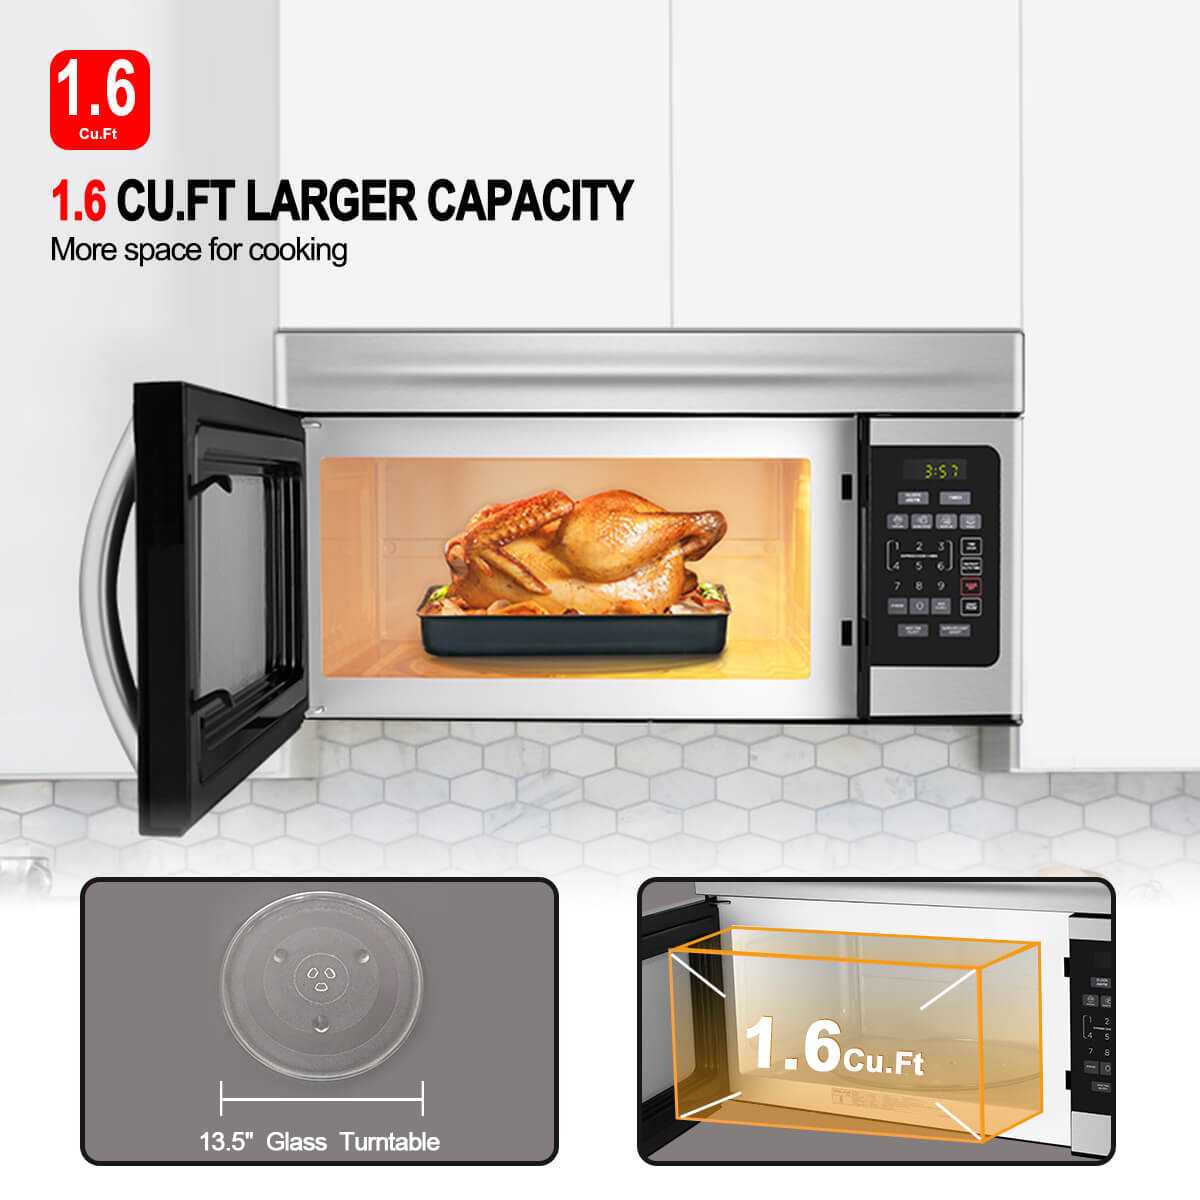 Gasland Chef Gasland 30 Inch Over-the-Range Microwave Ovenwith 1.6 Cu. Ft. Capacity, 300 CFM in Stainless Steel